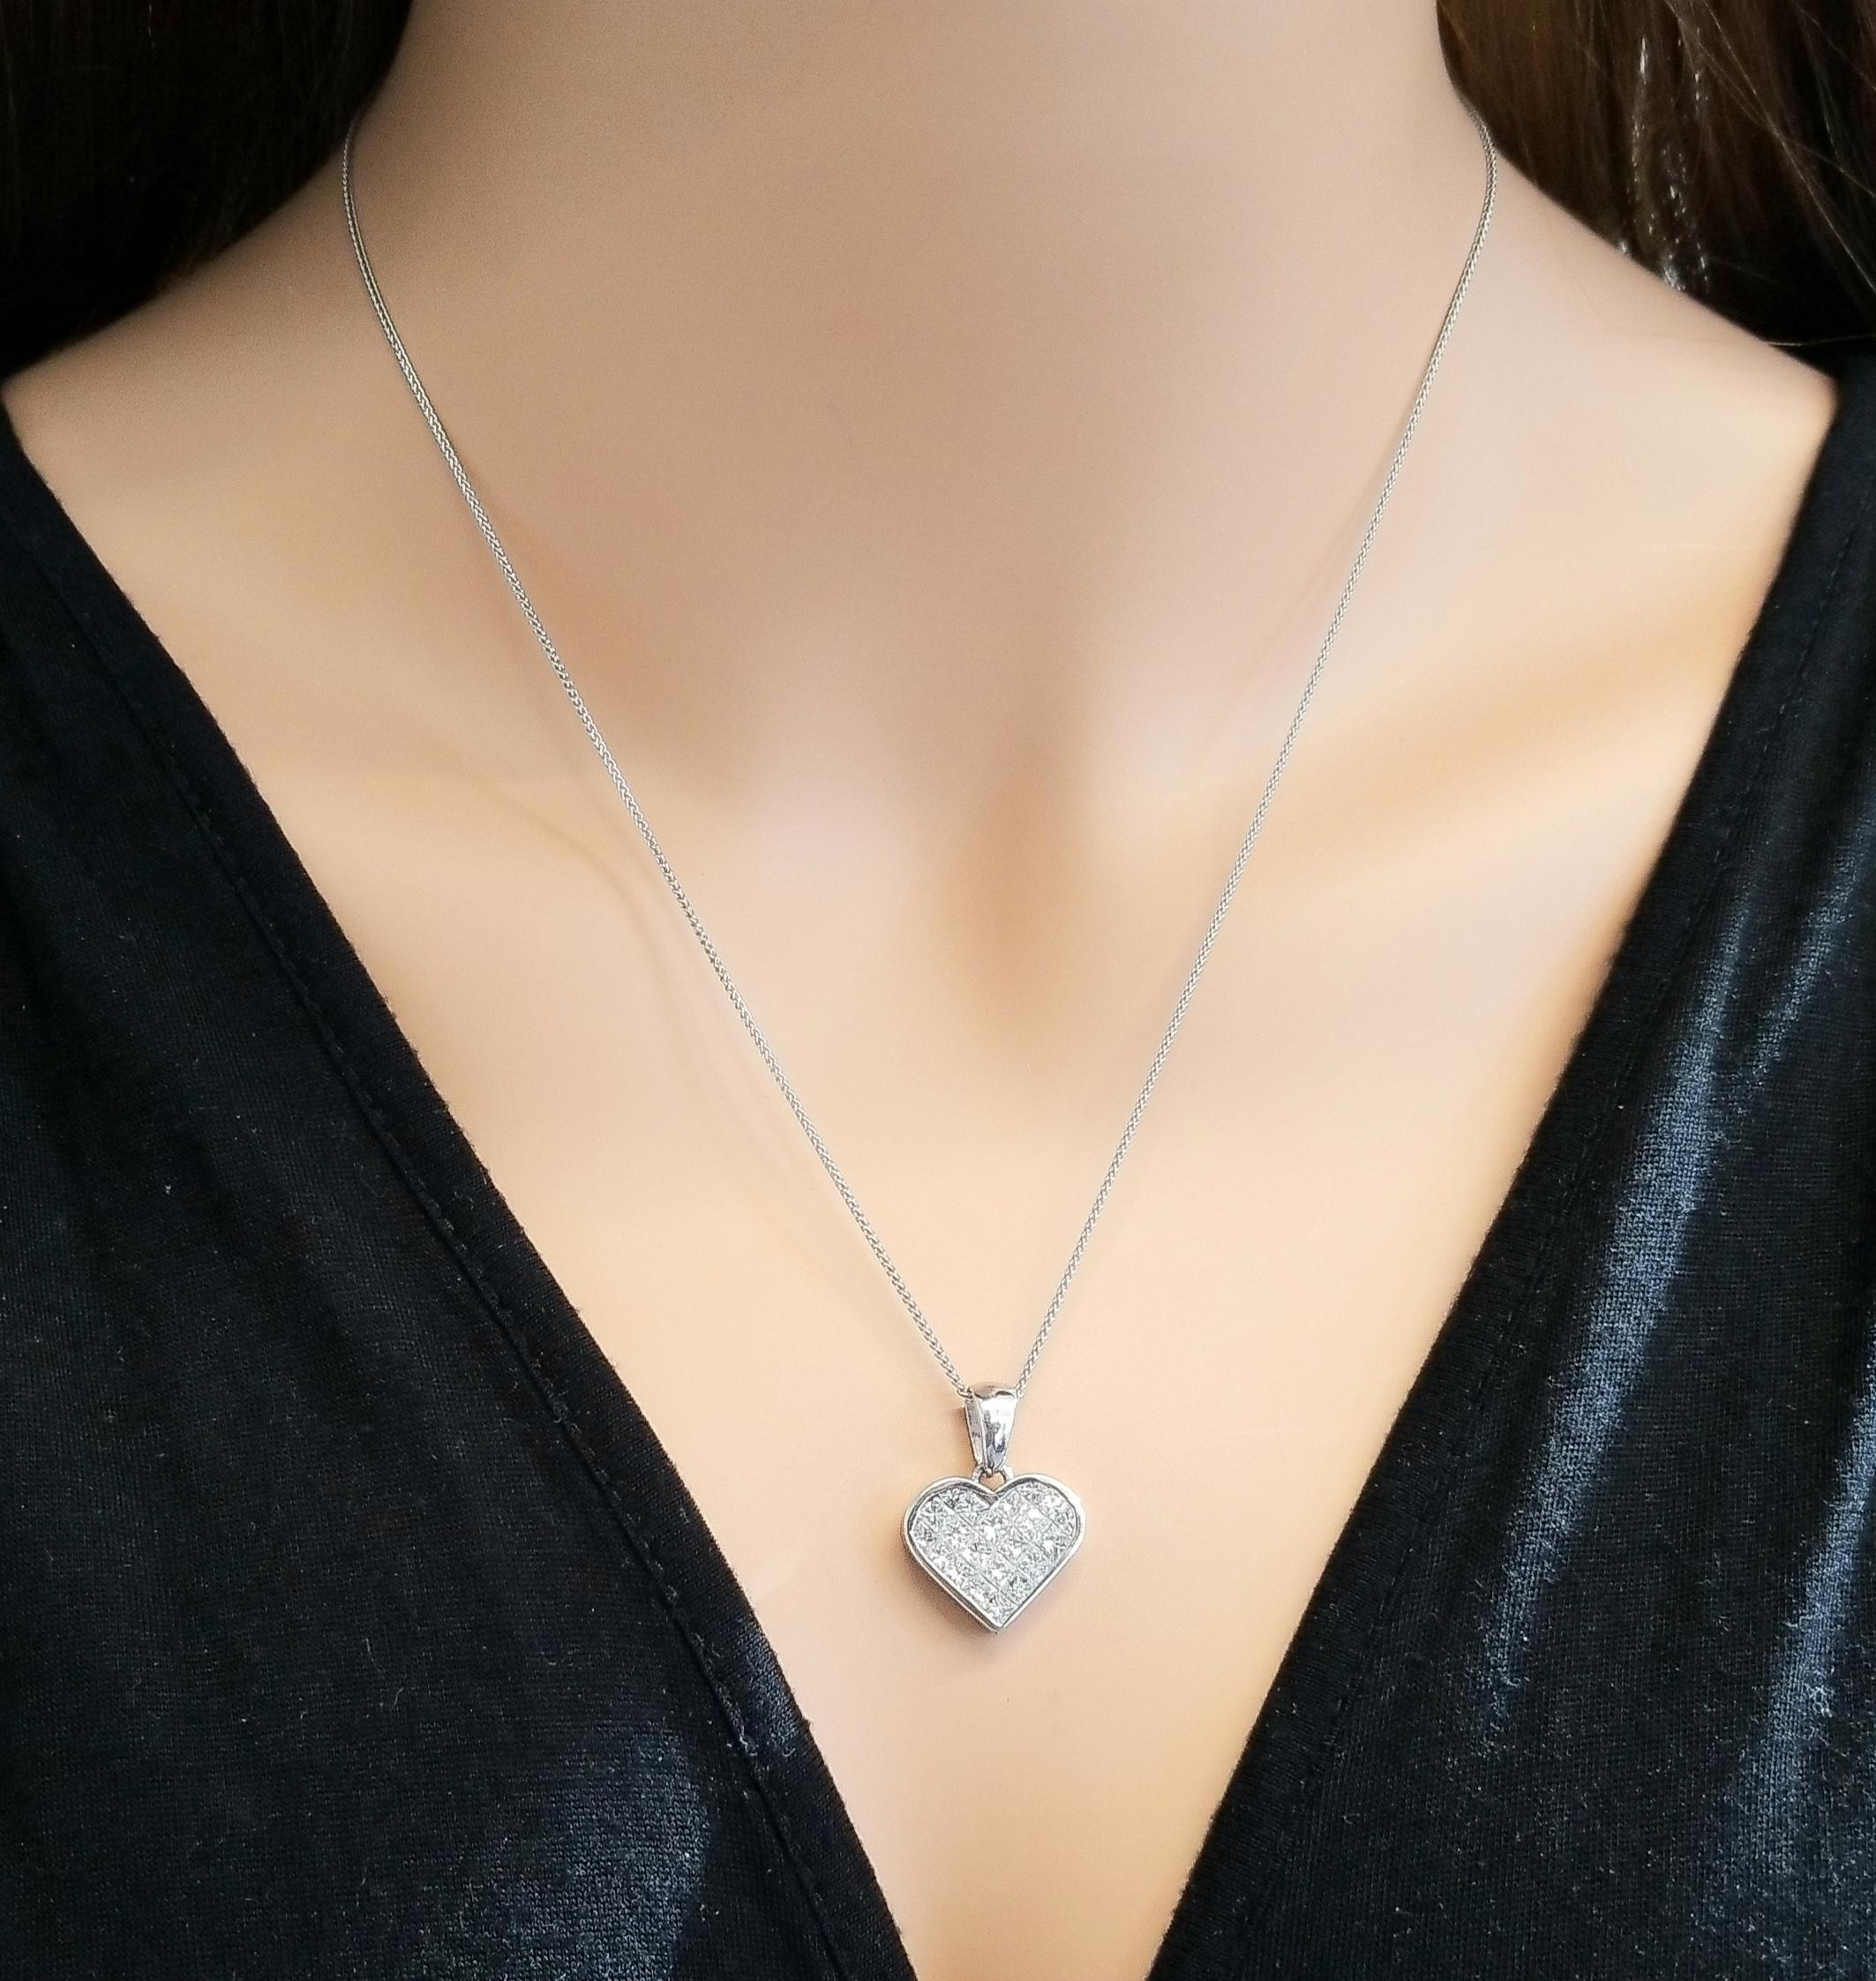 This gorgeous diamond heart pendant is invisibly set in 18K white gold. It features a sparkling collection of invisible set F-G color and VS2 clarity princess cut diamonds that fill up the center. The total diamond weight of this piece is 2.11 carat